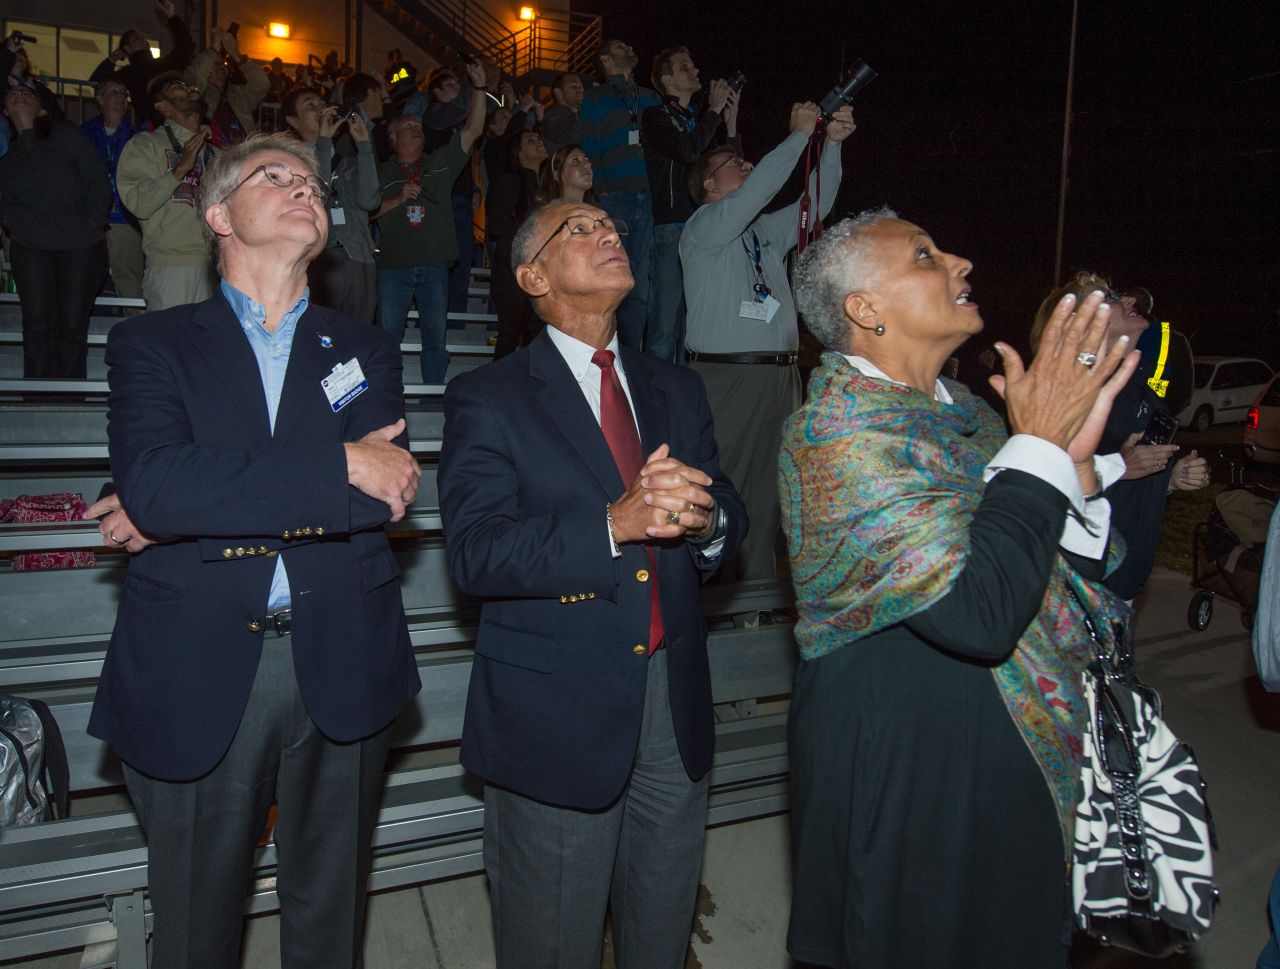 David W. Thompson, chairman and CEO of Orbital Sciences, left, NASA Administrator Charles Bolden and Mrs. Jaqueline Bolden watch the launch on September 6.